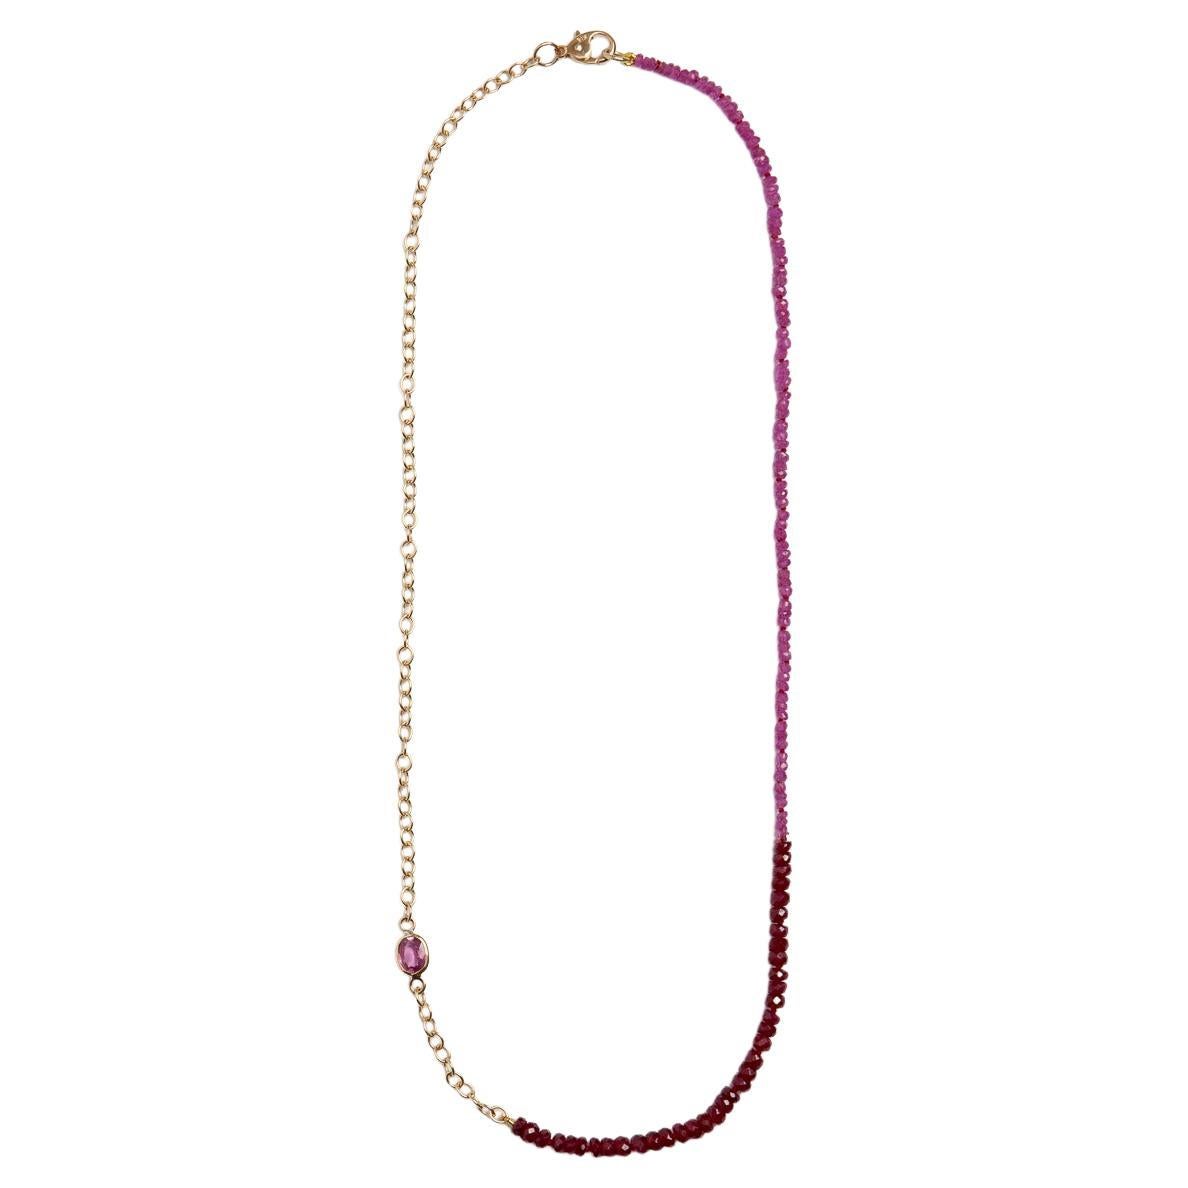 Objet-A - Beaded Necklace - Ruby Beads, Tourmaline Gem and 18k Yellow Gold Chain